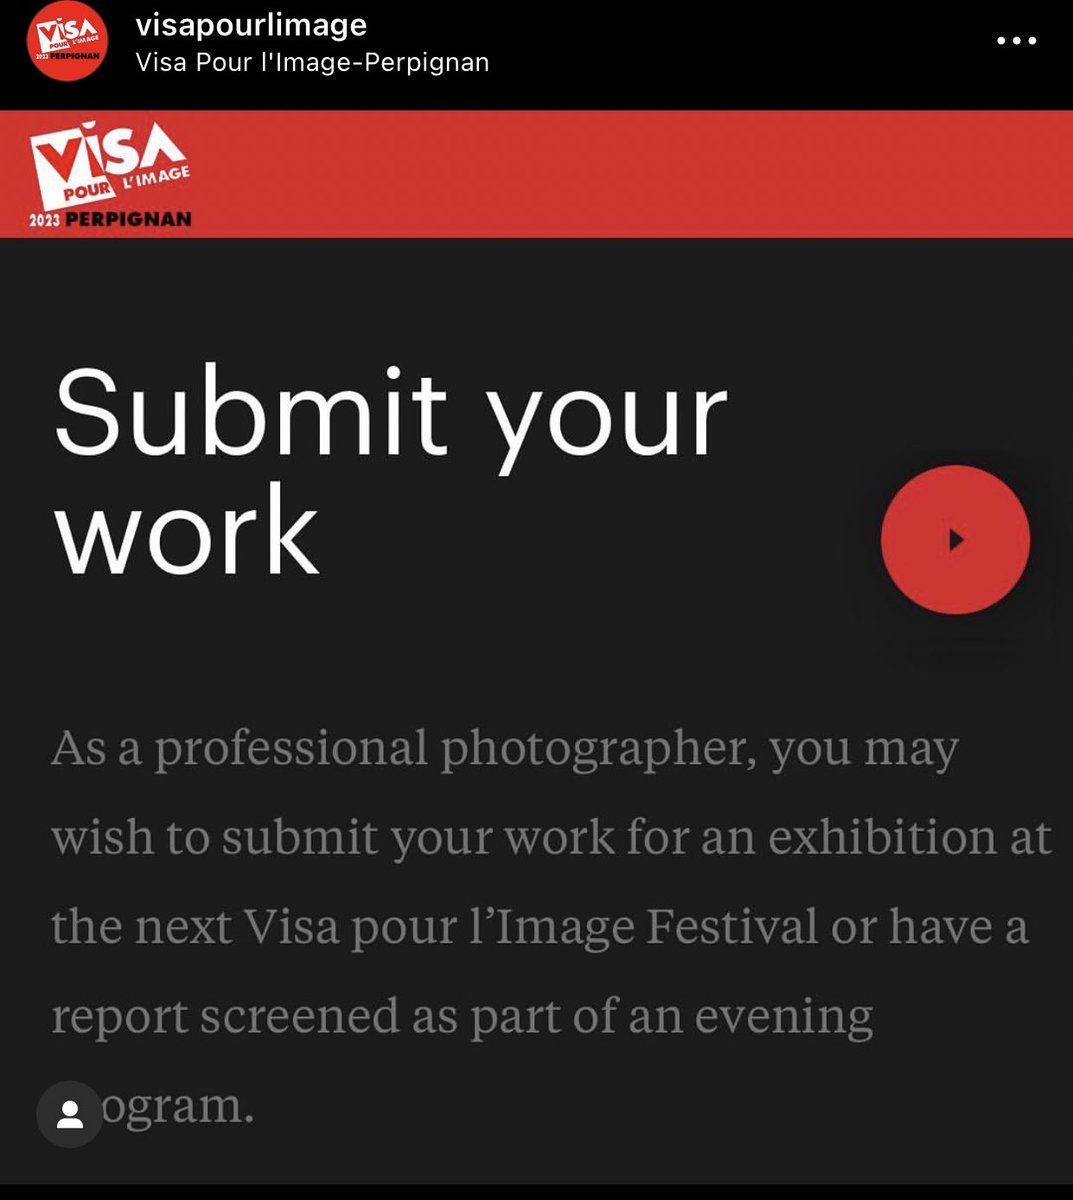 This opportunity isn’t just for photographers, it’s one of the biggest photo exhibitions. Apply!

visapourlimage.com/en/festival/so…

@TheMayorOtu @tobilobakanmi @Visapourlimage